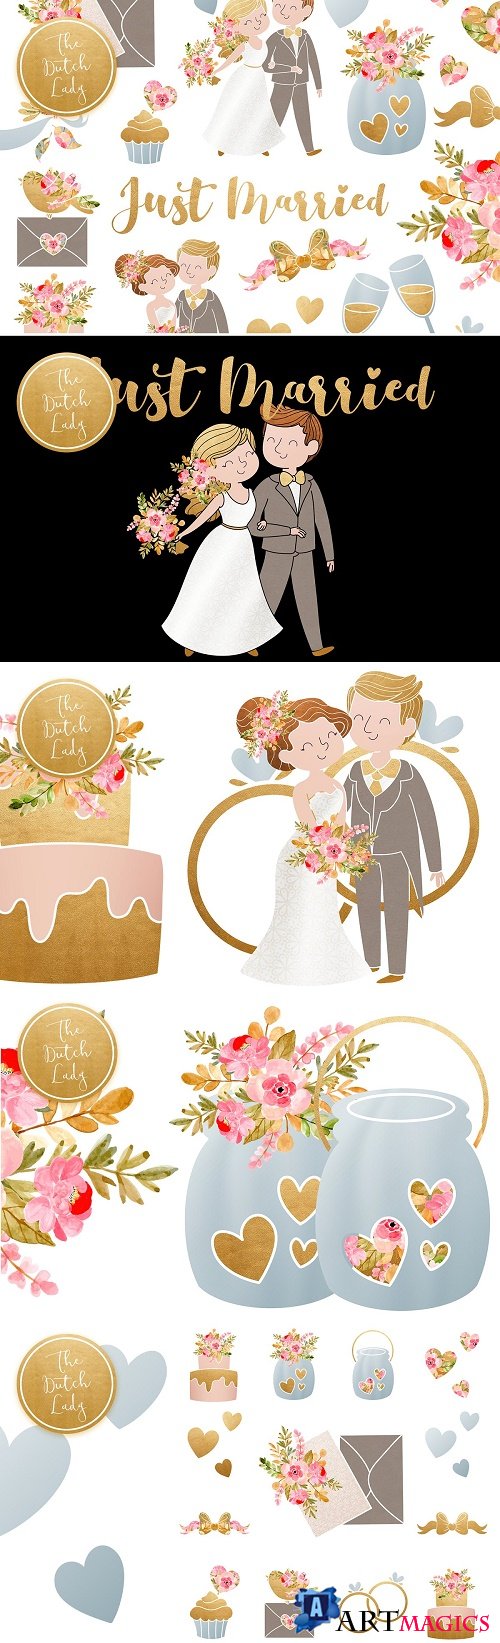 Wedding Day & Marriage Clipart Set - 3910270